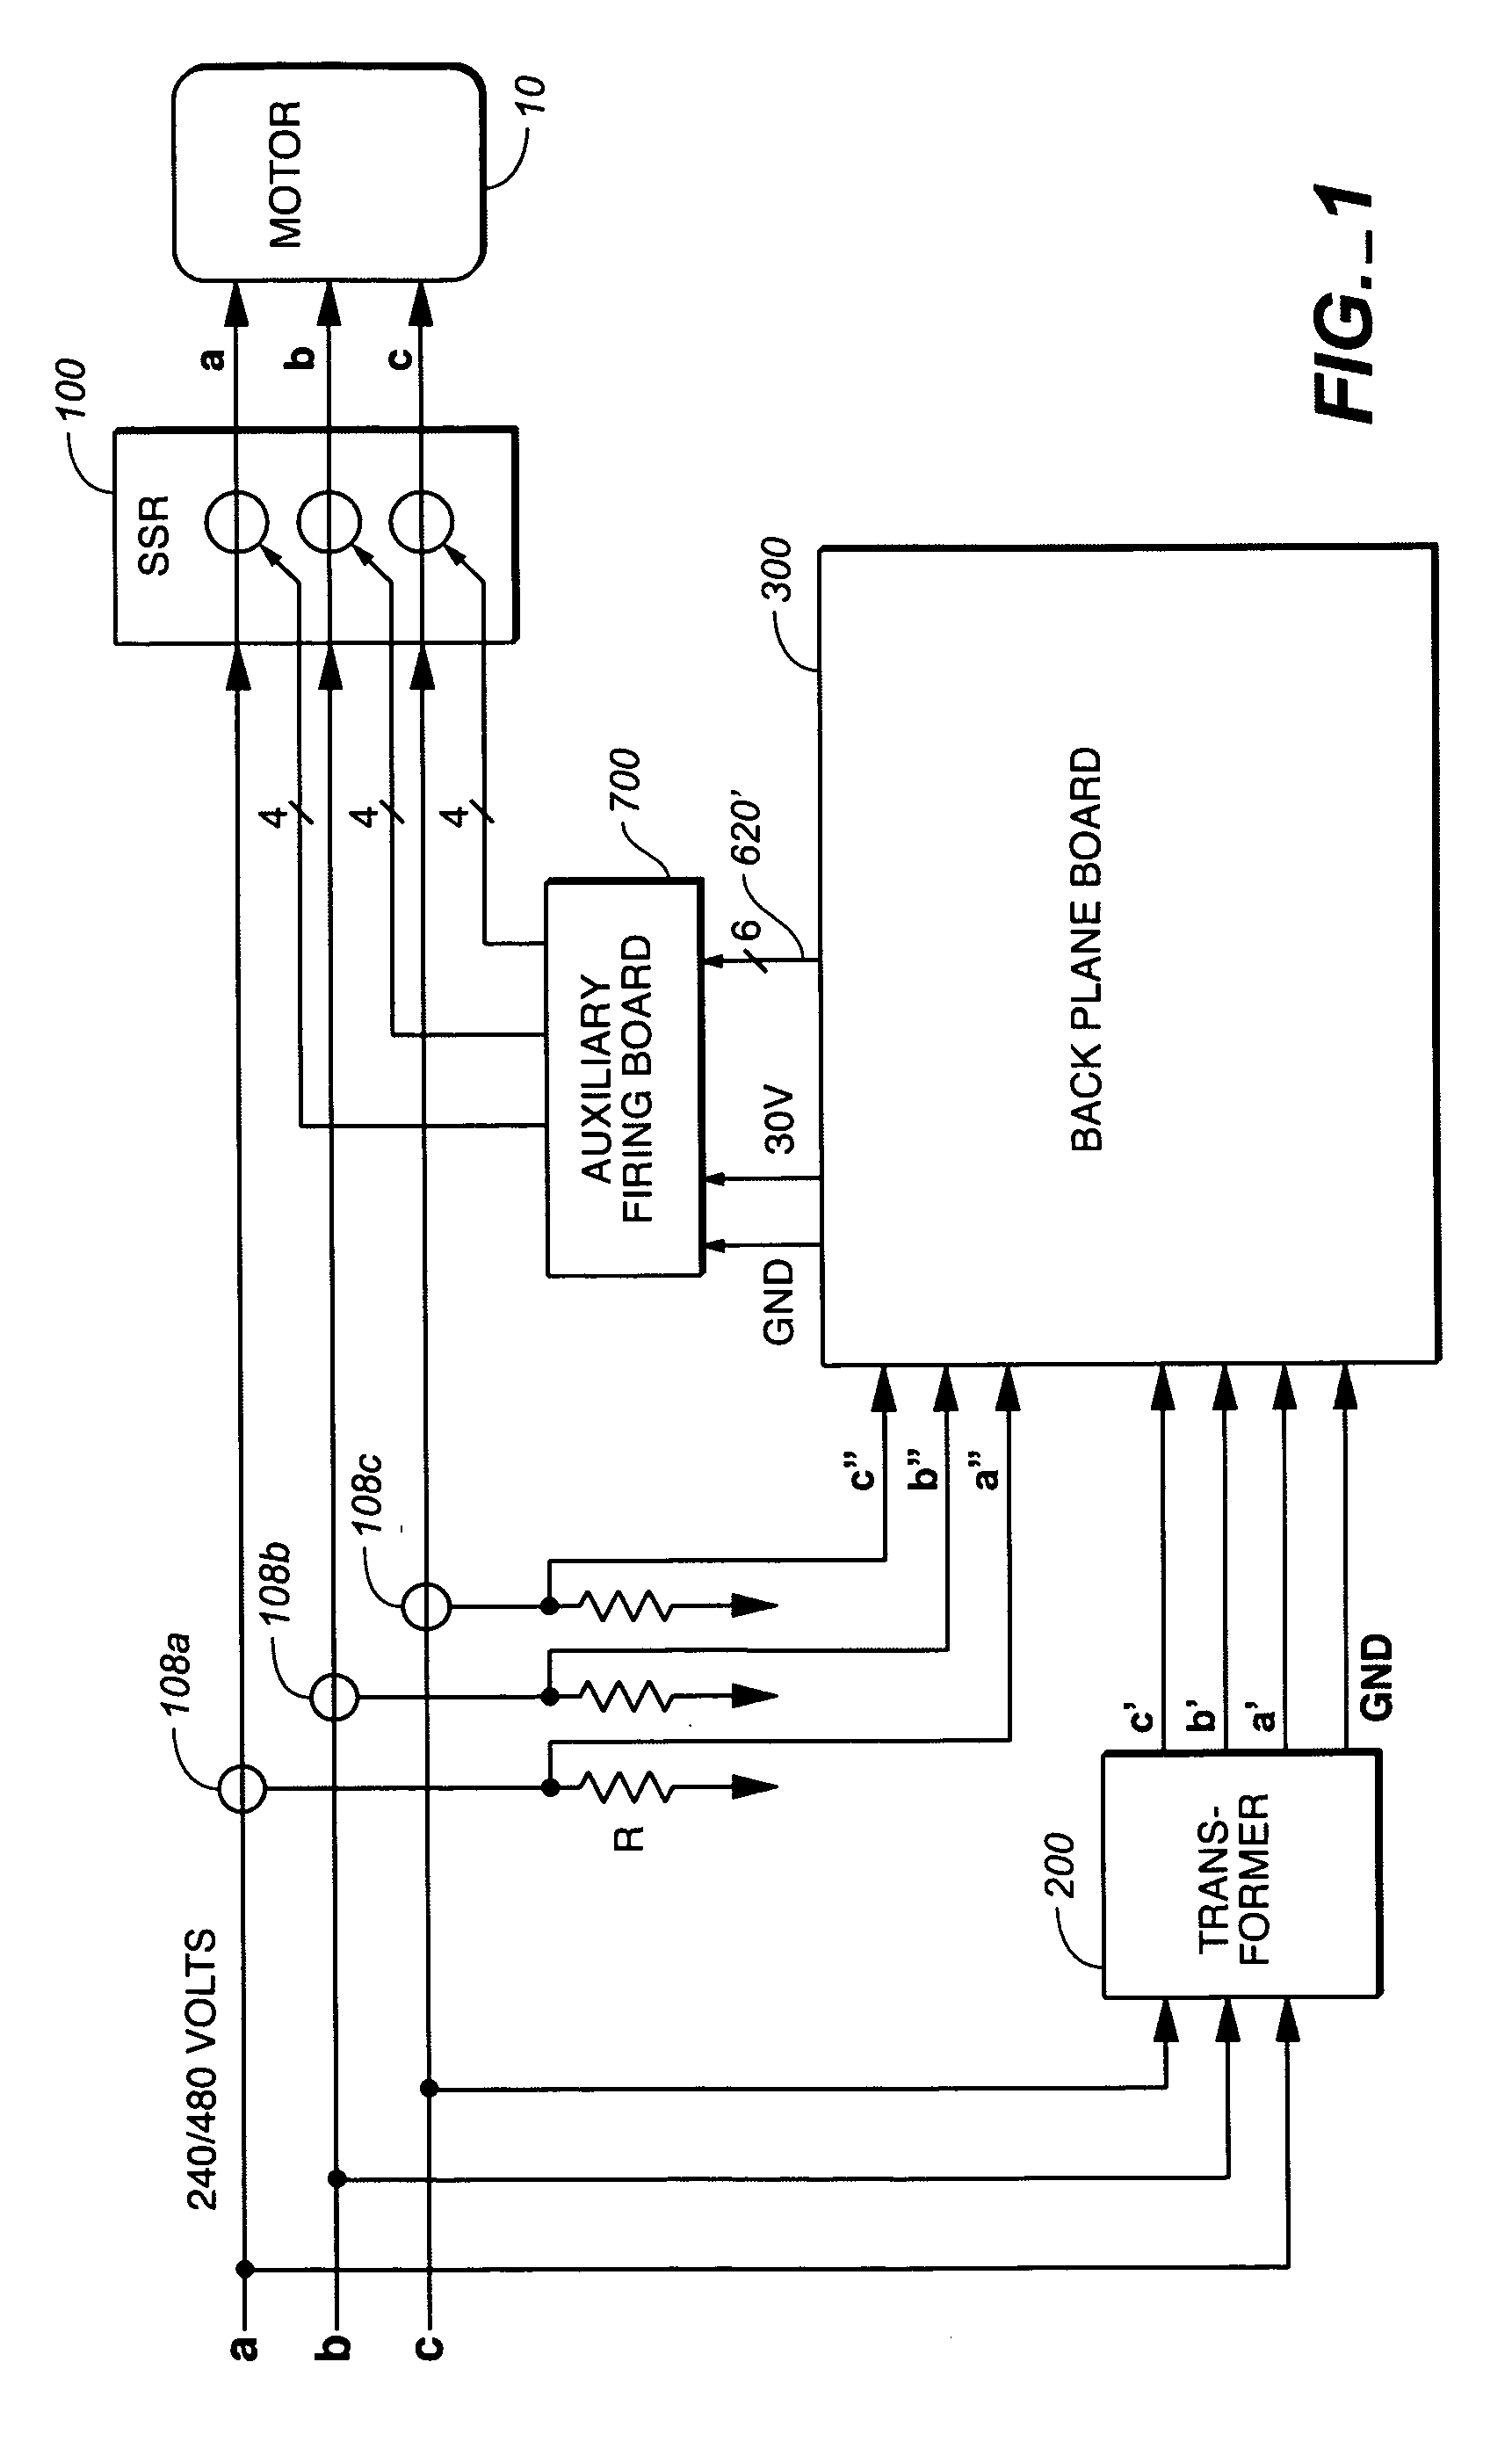 Method and apparatus using VAR measurements to control power input to a three-phase induction motor circuit